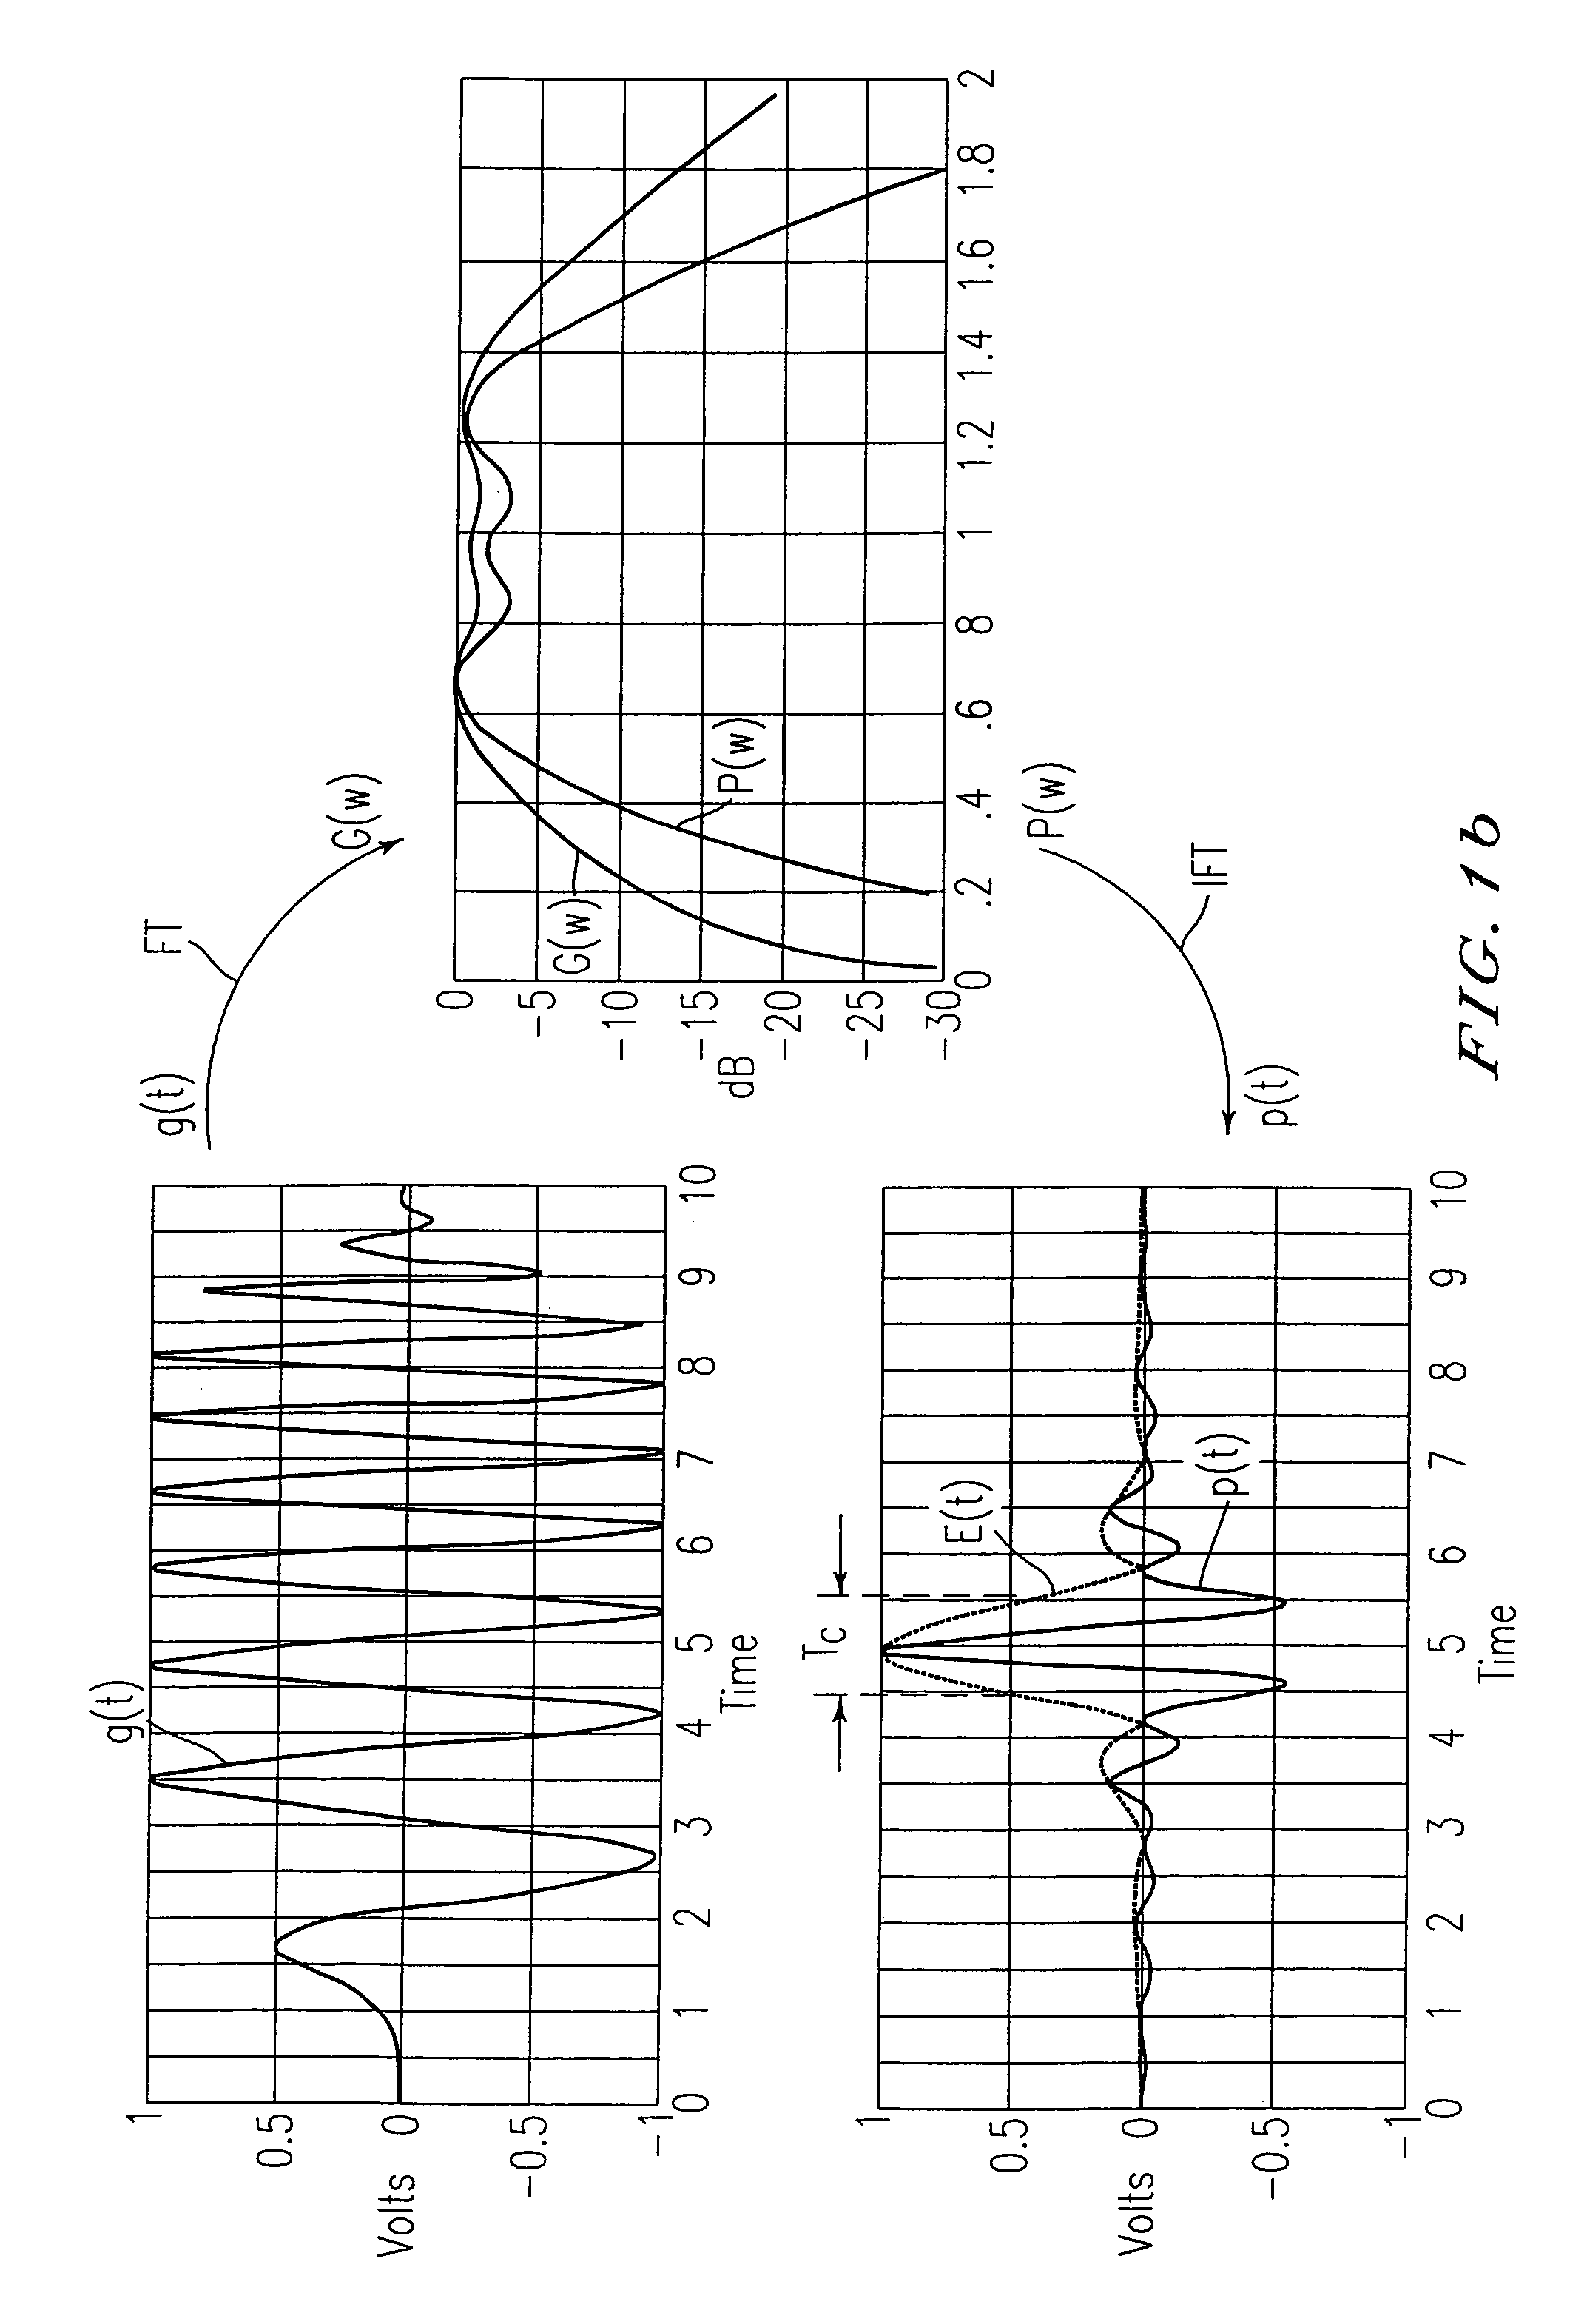 System and method for generating ultra wideband pulses